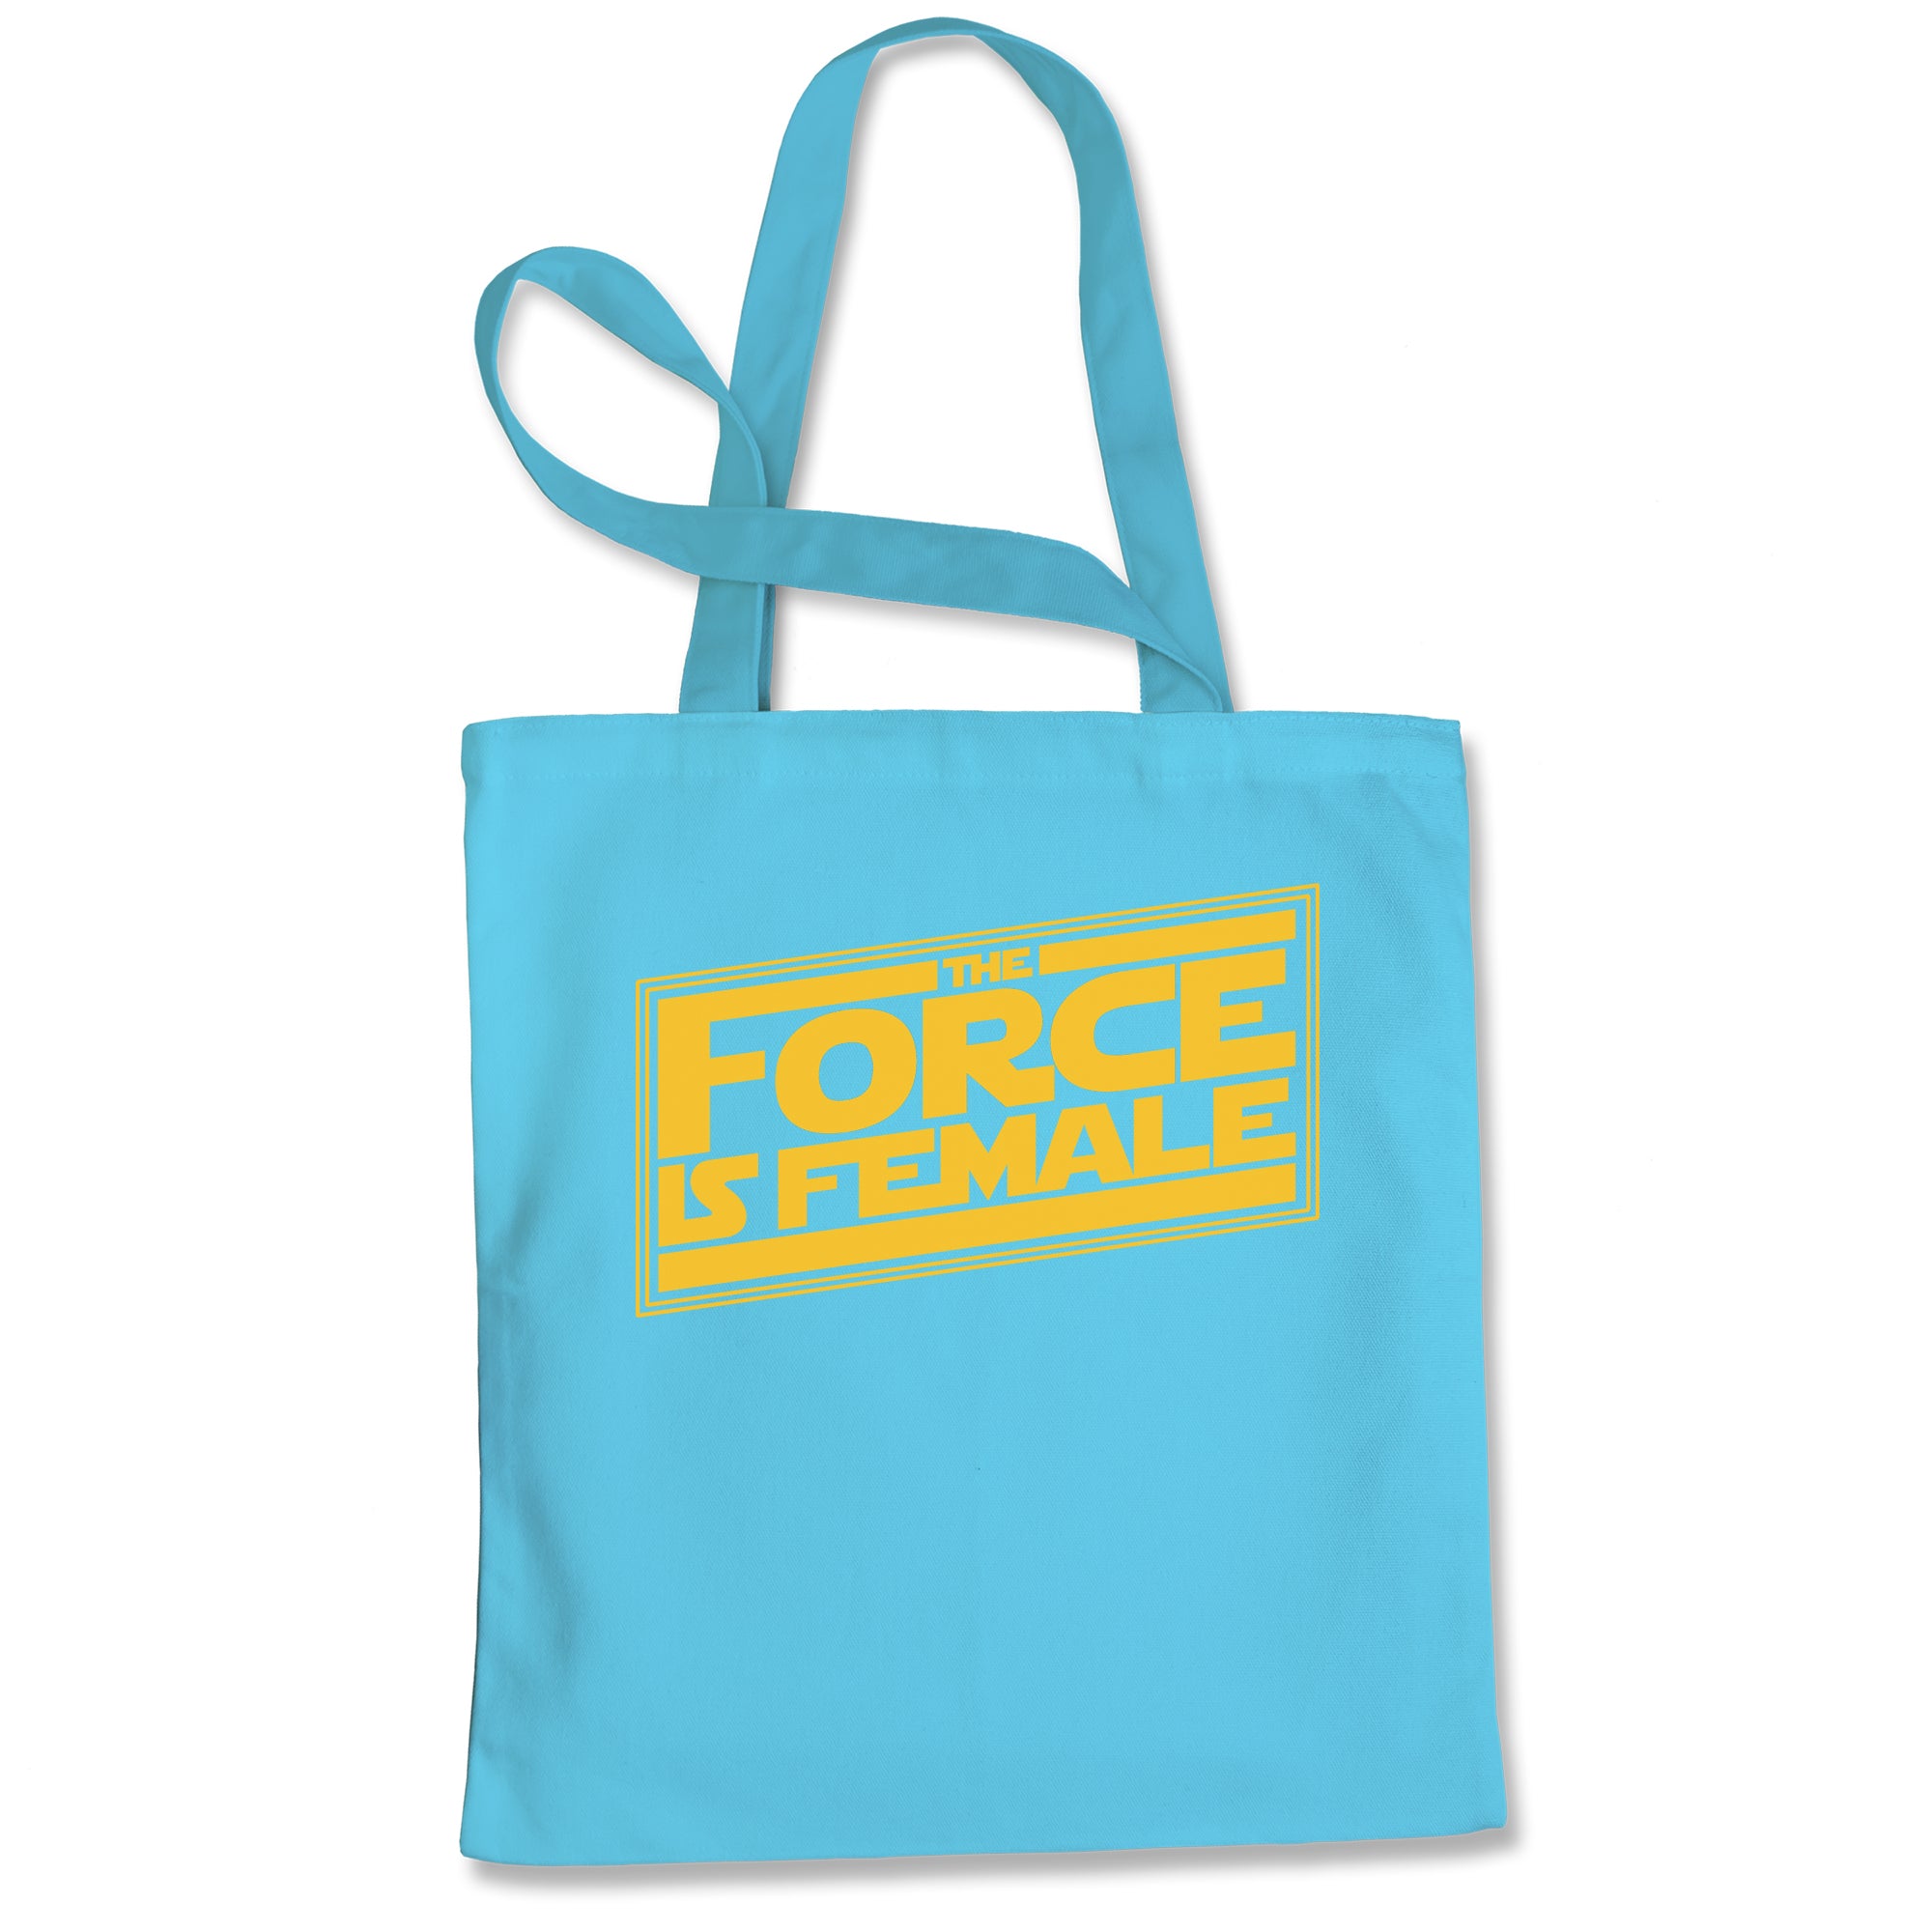 The Force is Female Feminist Star Warship Tote Bag